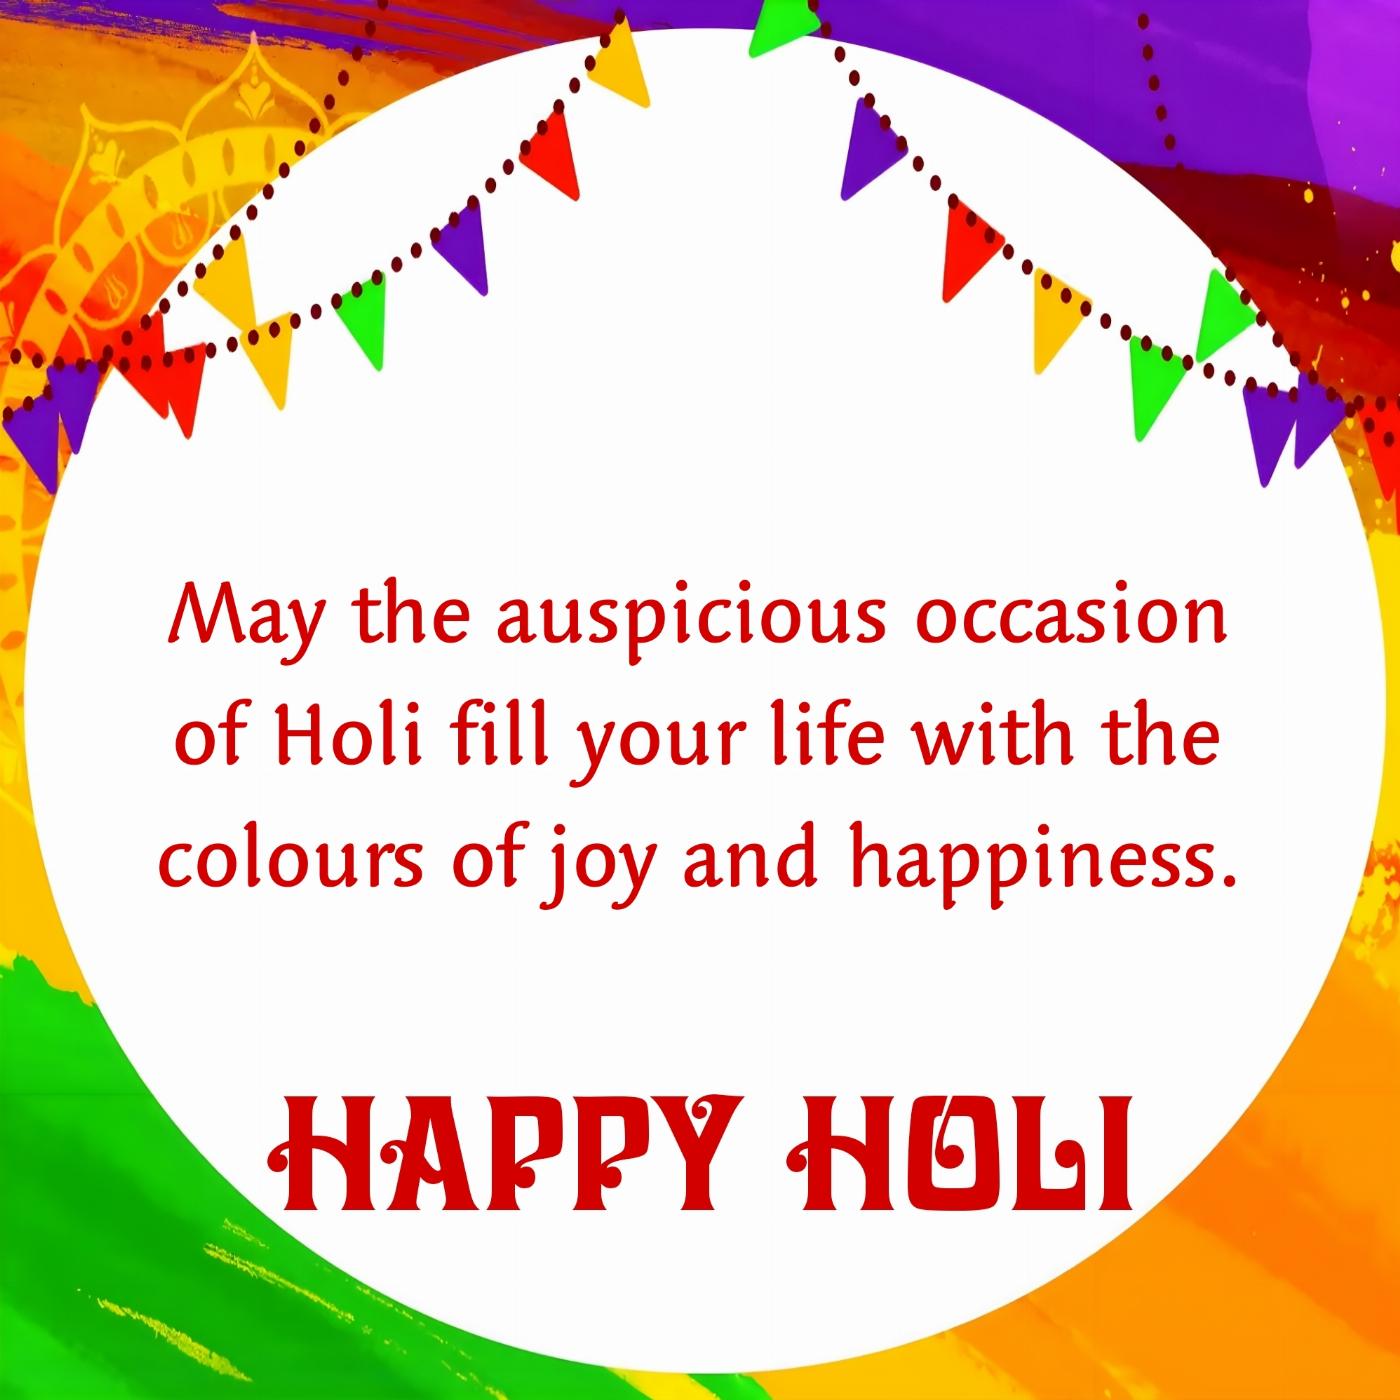 May the auspicious occasion of Holi fill your life with the colours